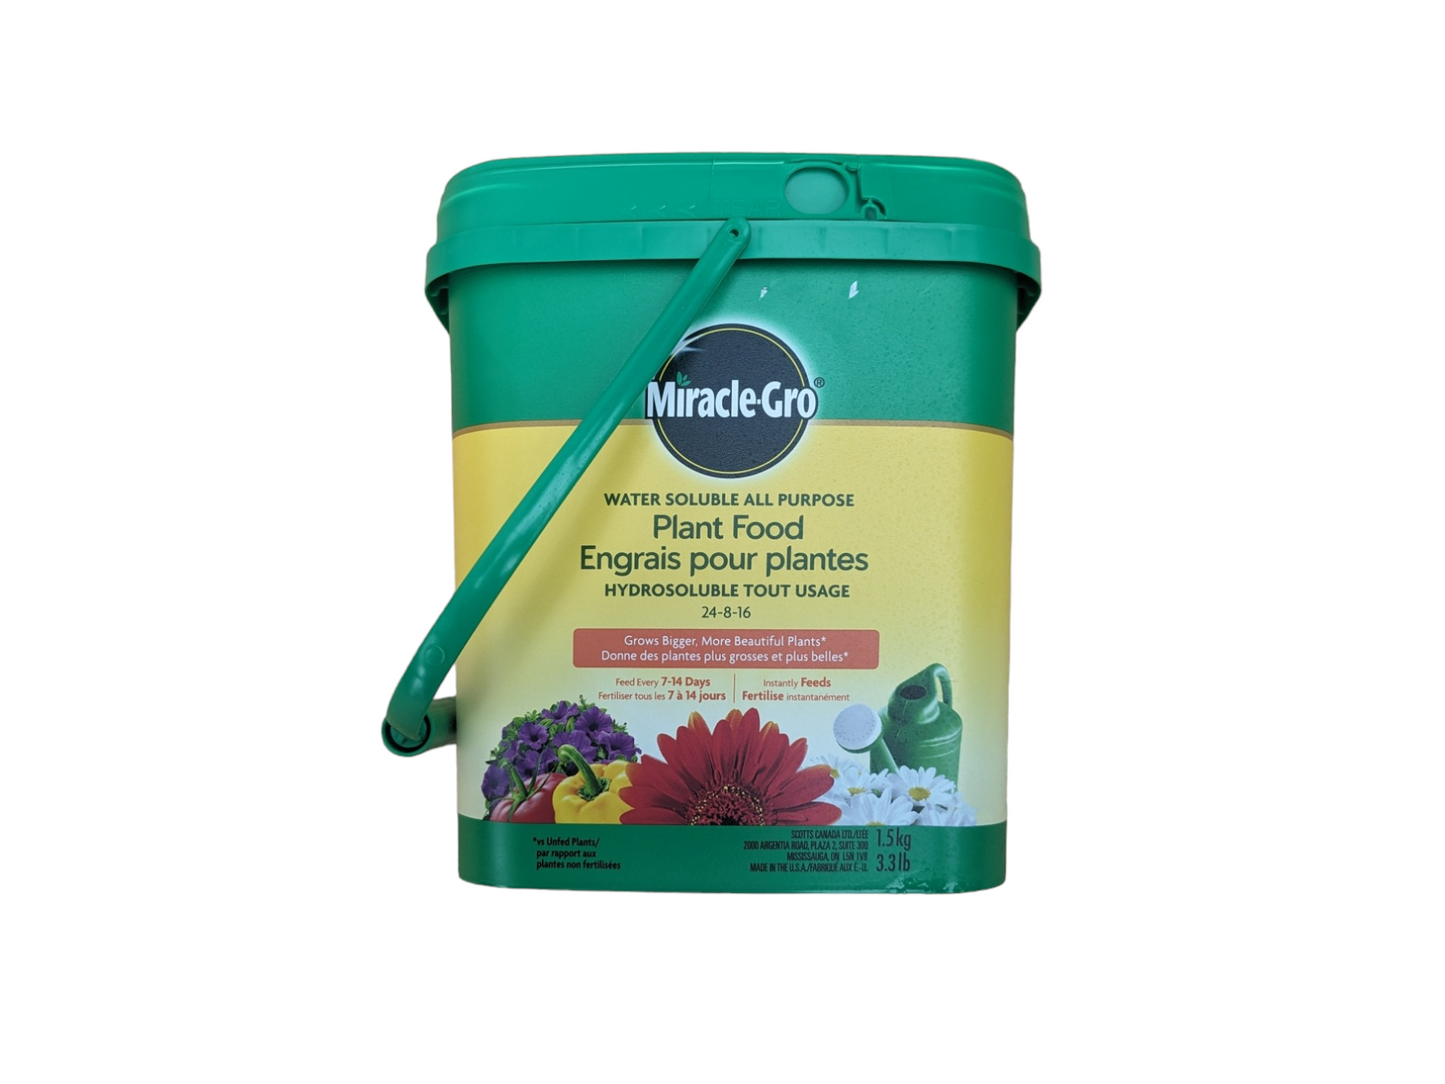 Miracle-Gro Water Soluble All Purpose Plant Food 1.5KG